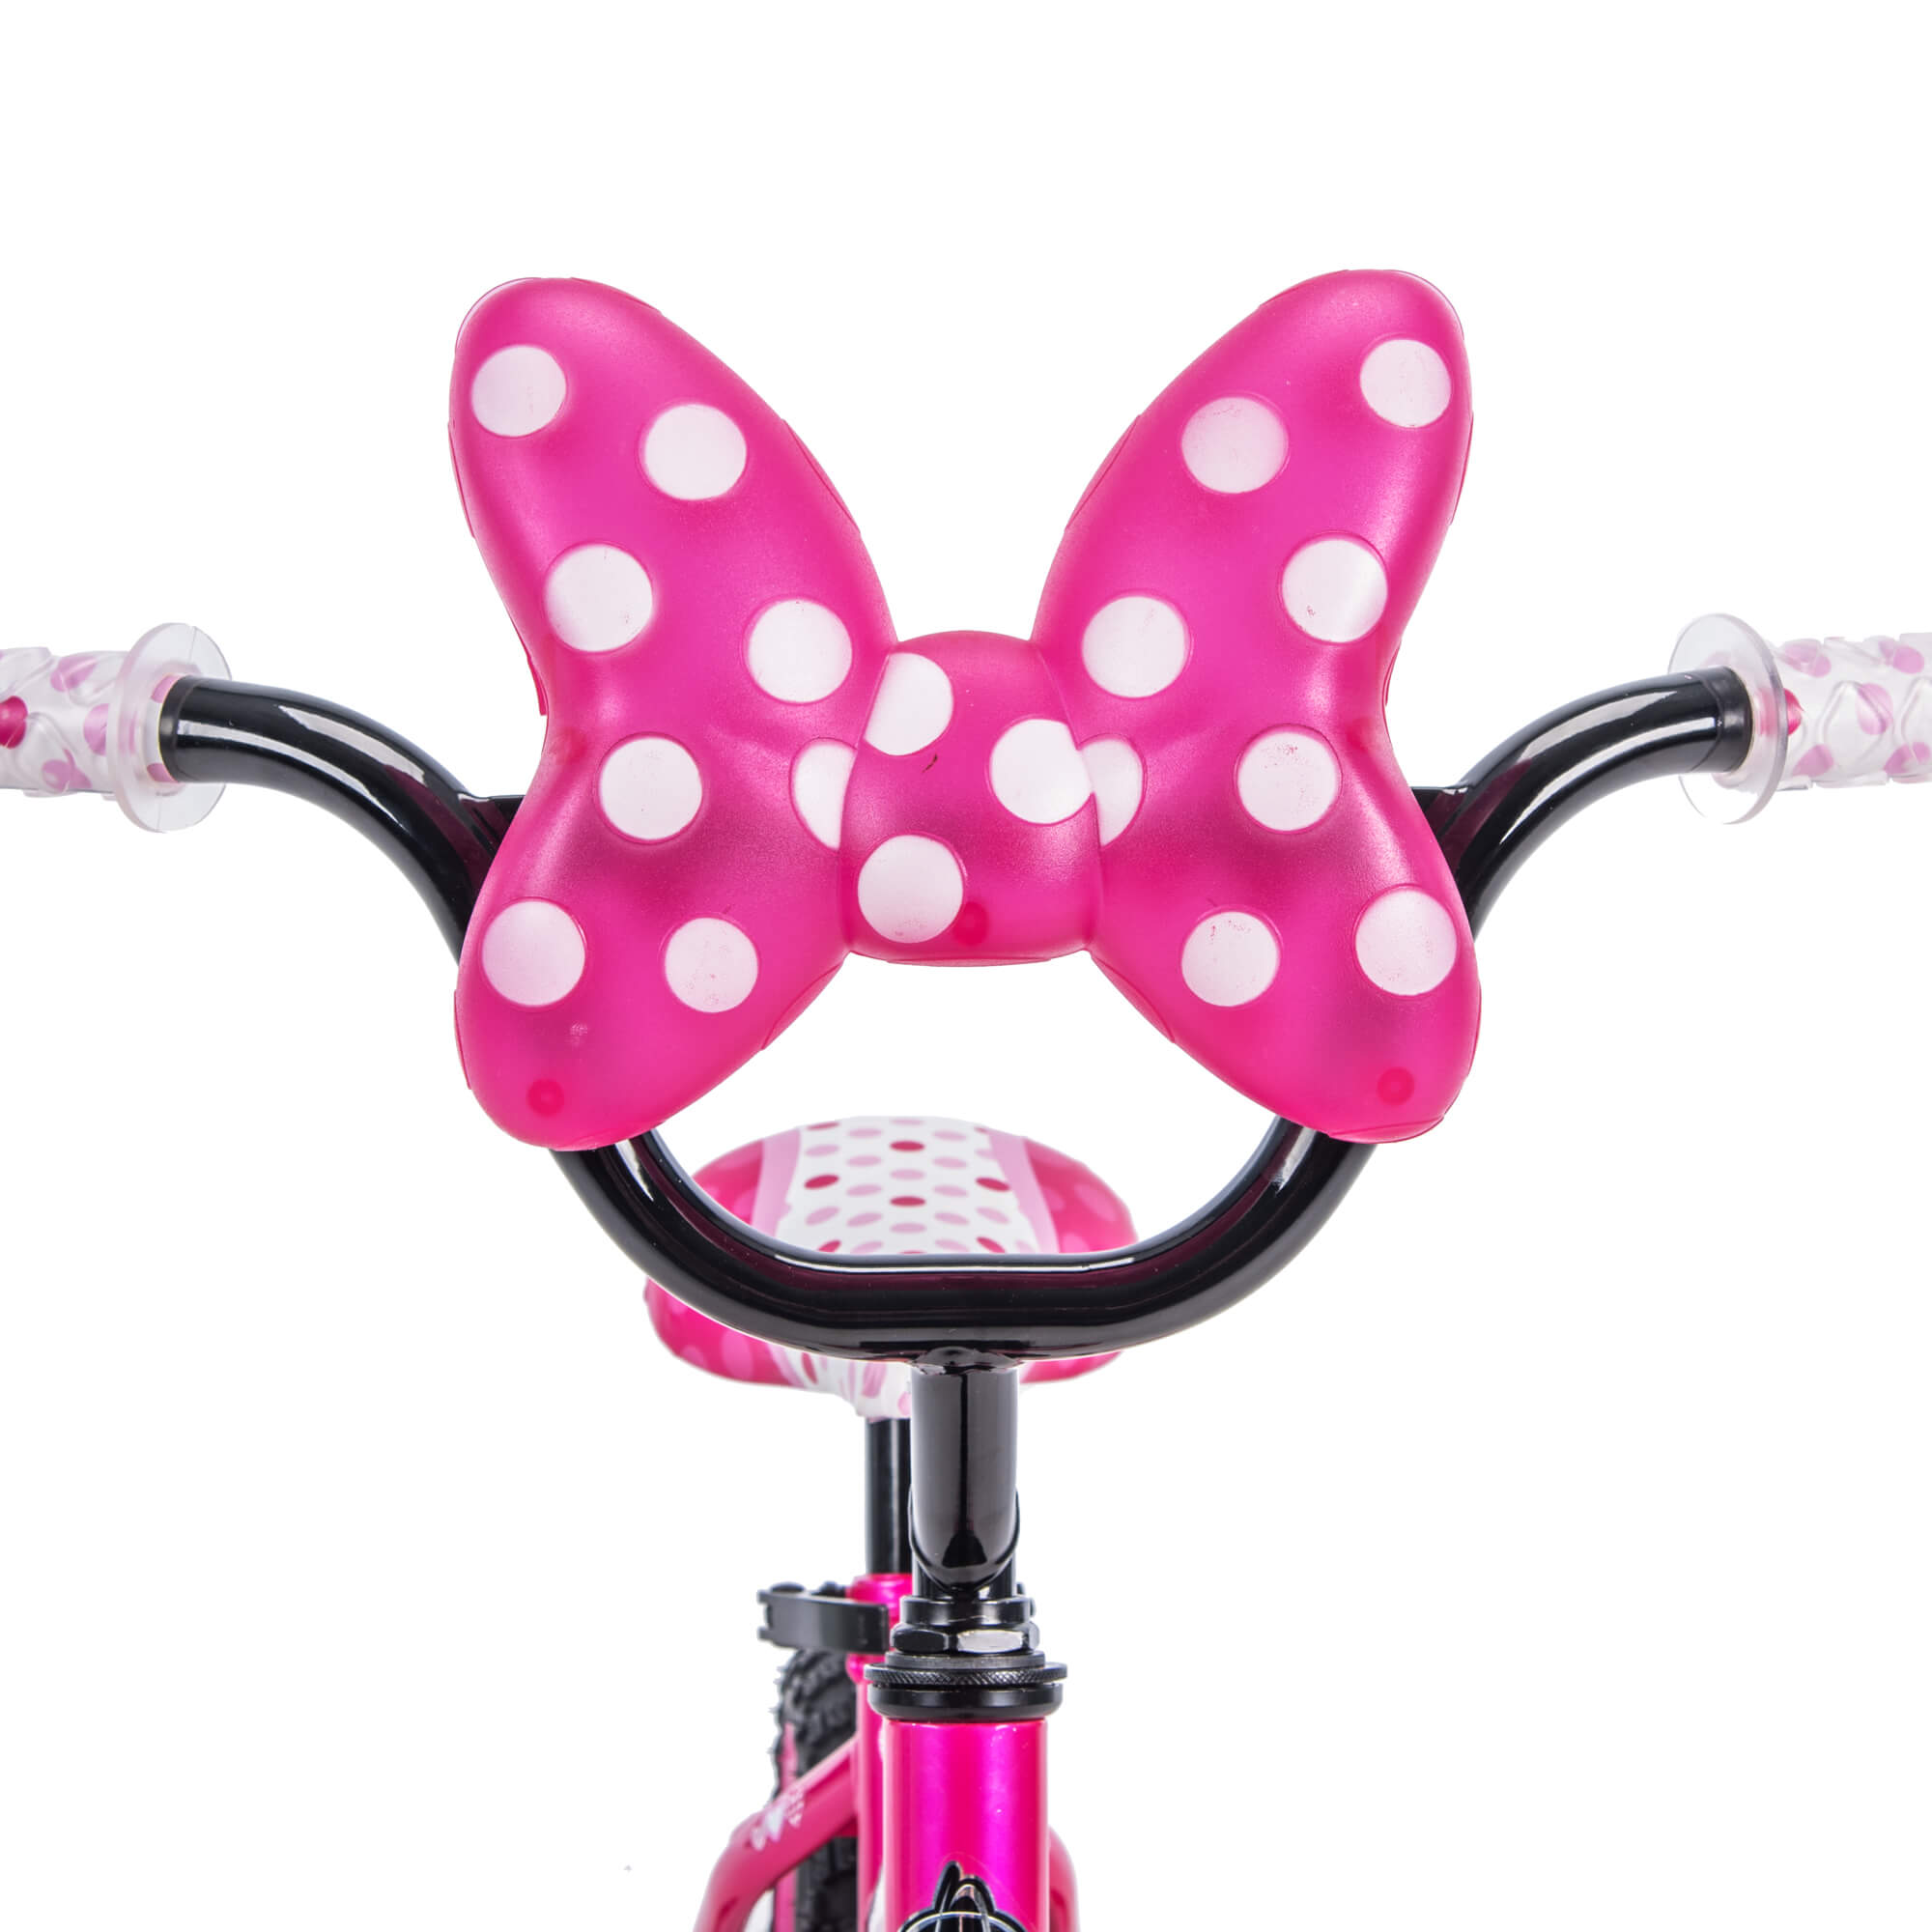 Disney Minnie Mouse 12-inch Bike by Huffy, Pink - image 3 of 6